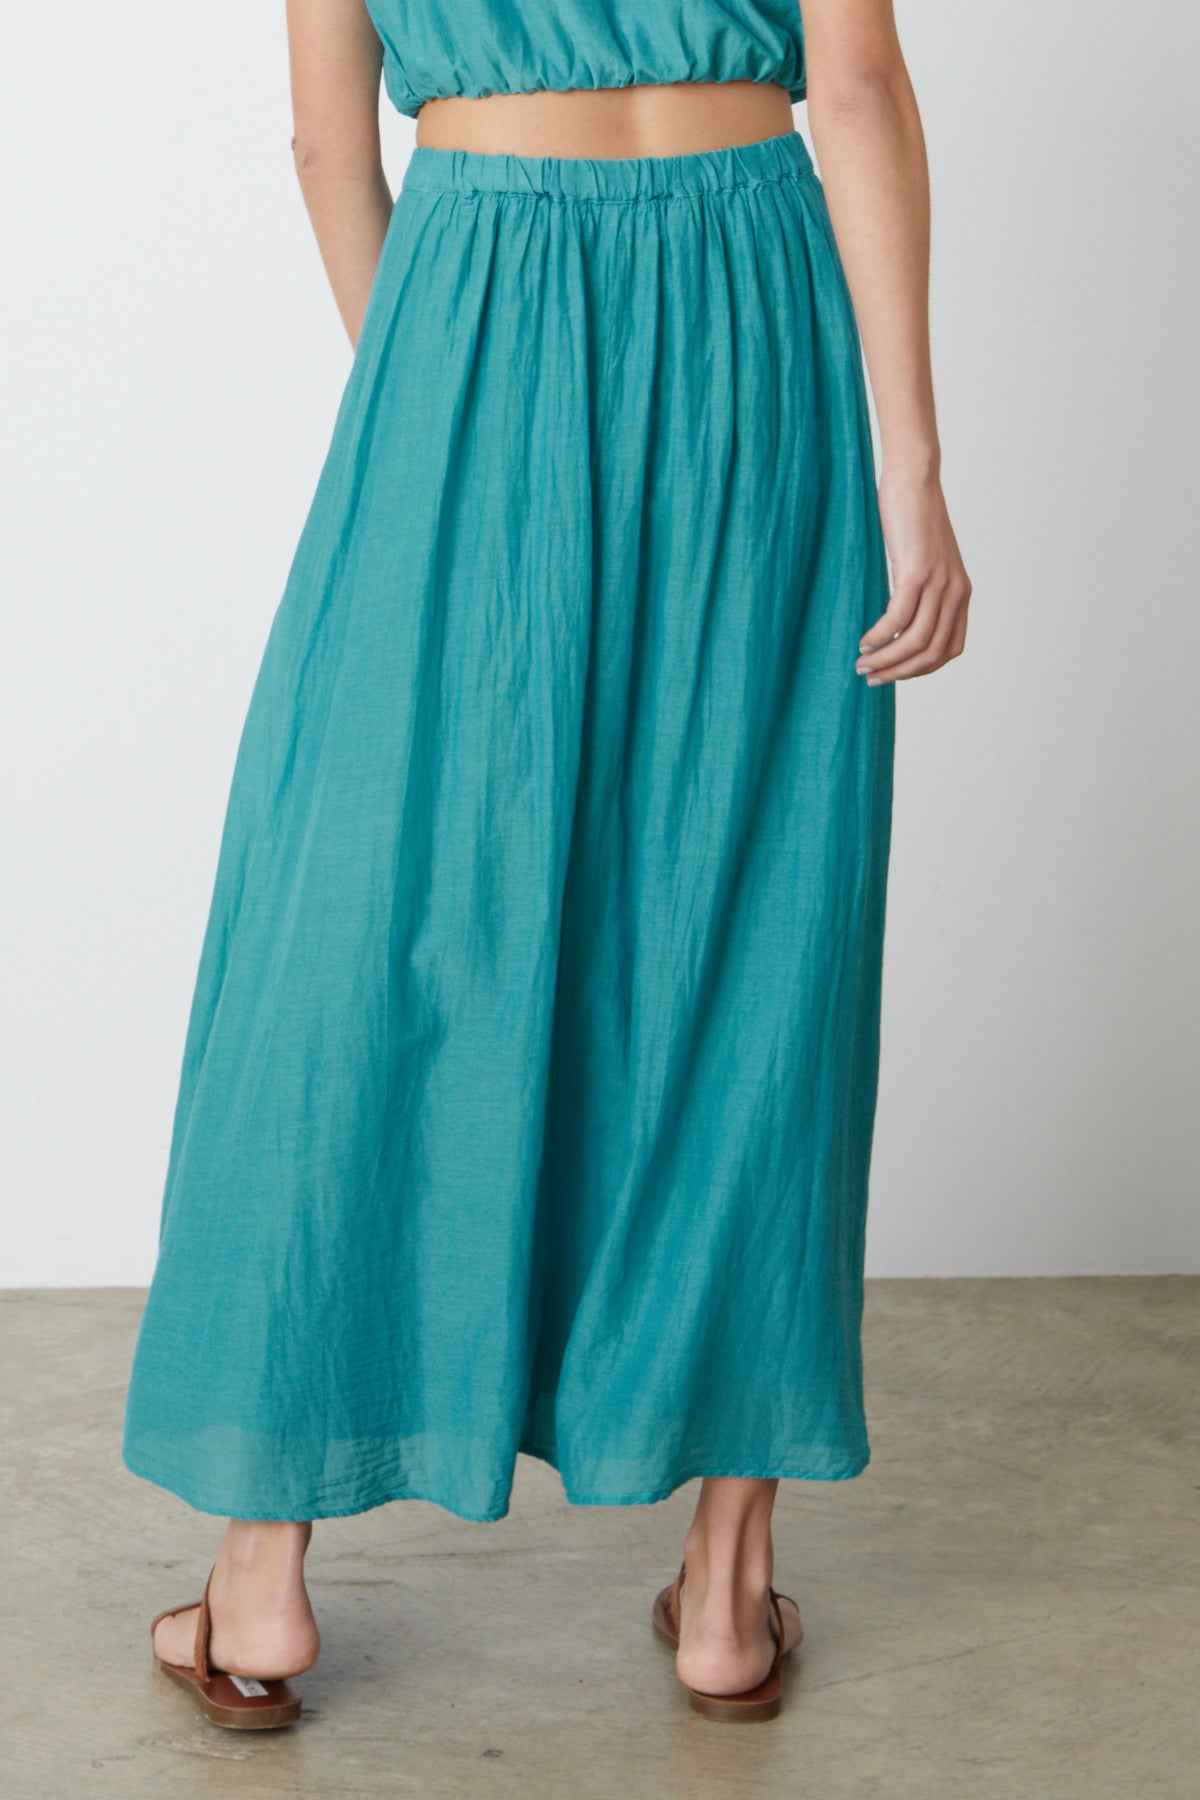   The back view of a woman wearing the Velvet by Graham & Spencer MARIELA MAXI SKIRT. 